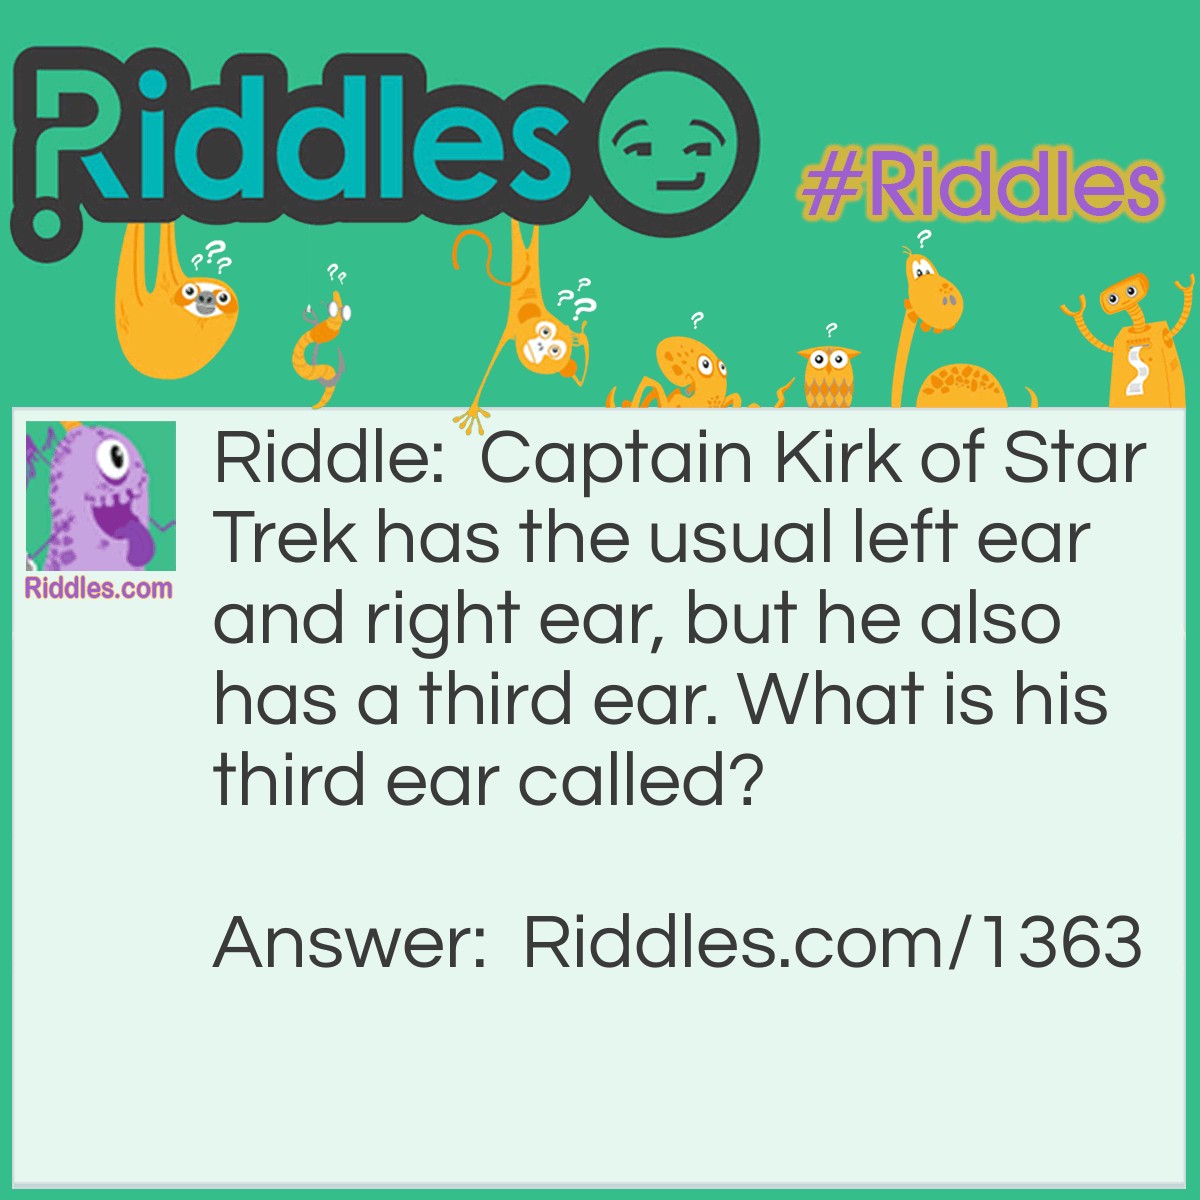 Riddle: Captain Kirk of Star Trek has the usual left ear and right ear, but he also has a third ear. What is his third ear called? Answer: The final front ear